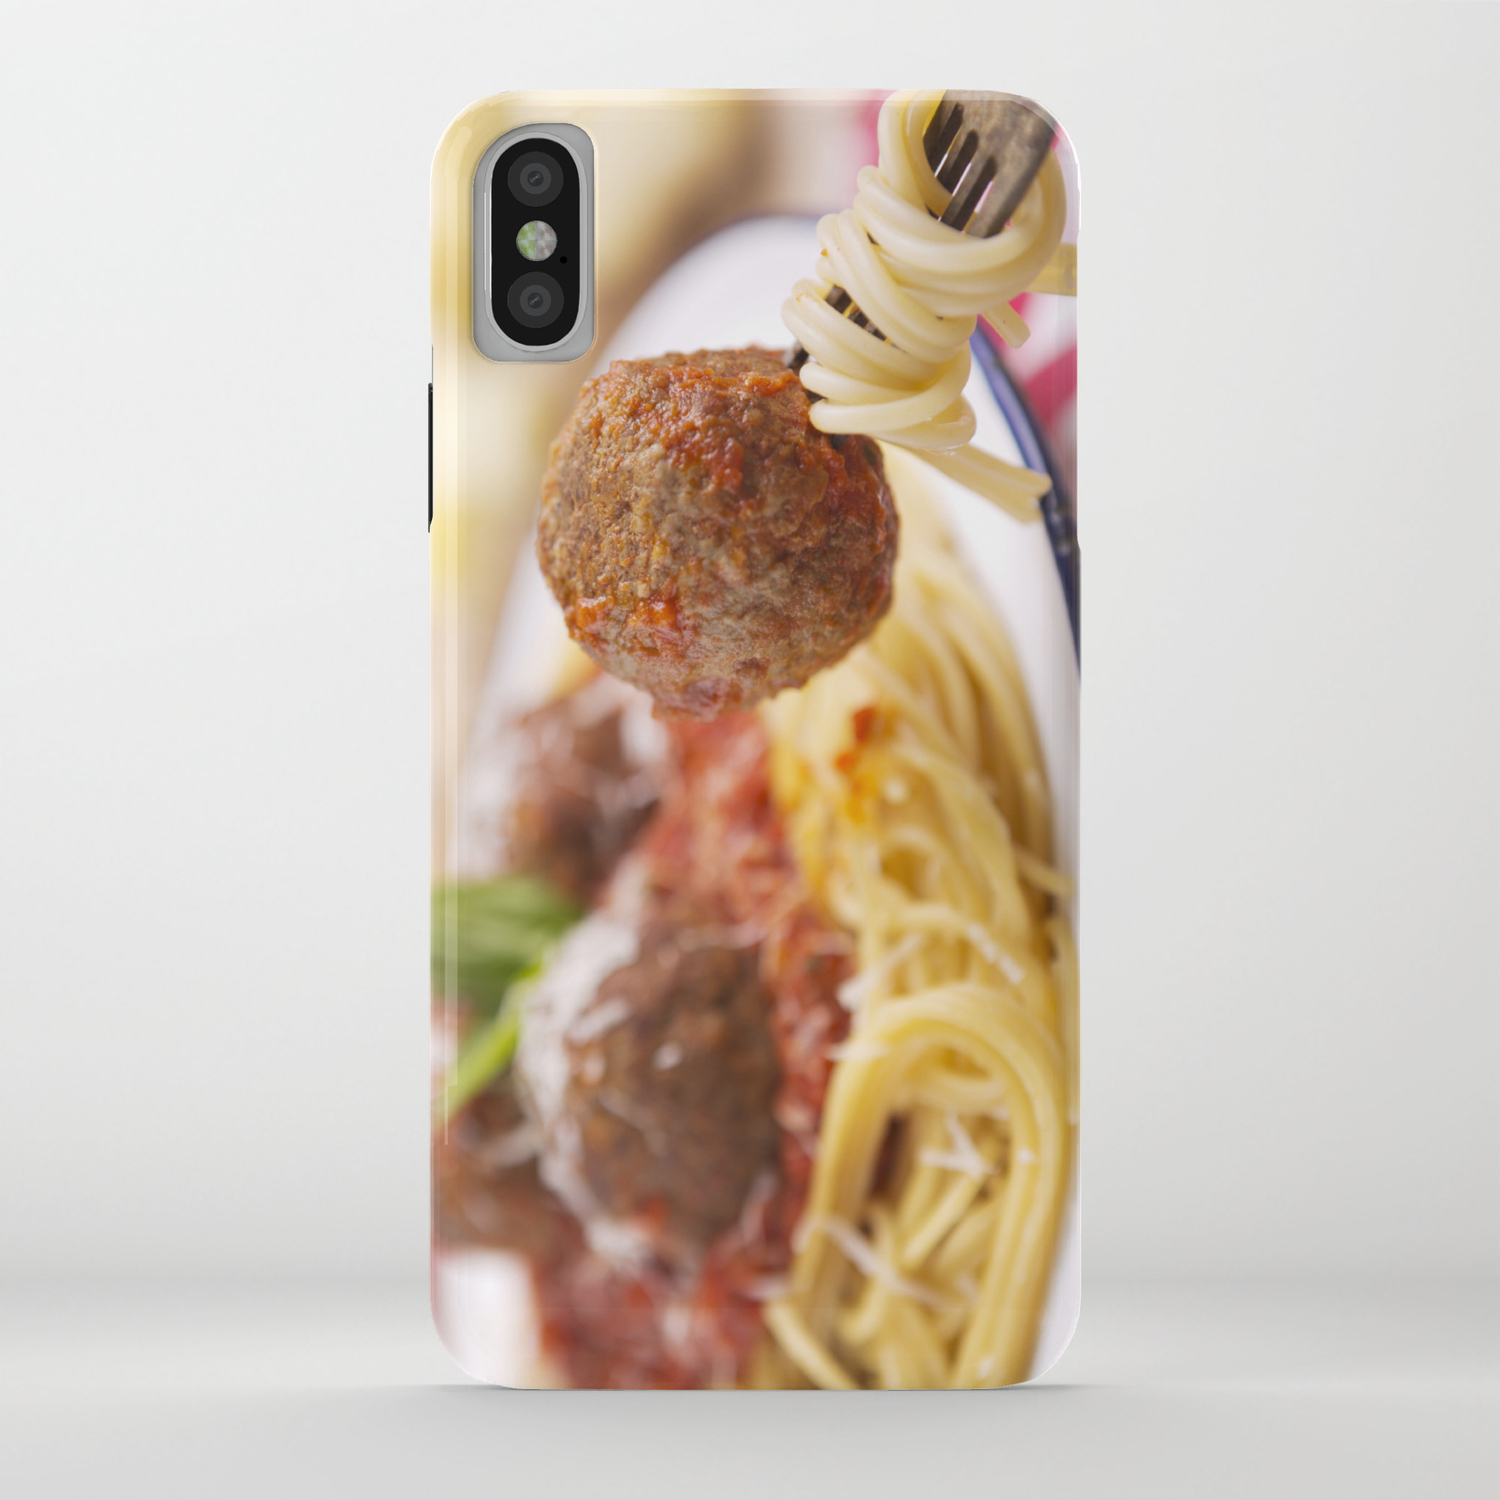 Spaghetti And Meatball On A Fork Plate In The Background Iphone Case By Sarawinter Society6 By gareth beavis 24 november 2020. spaghetti and meatball on a fork plate in the background iphone case by sarawinter